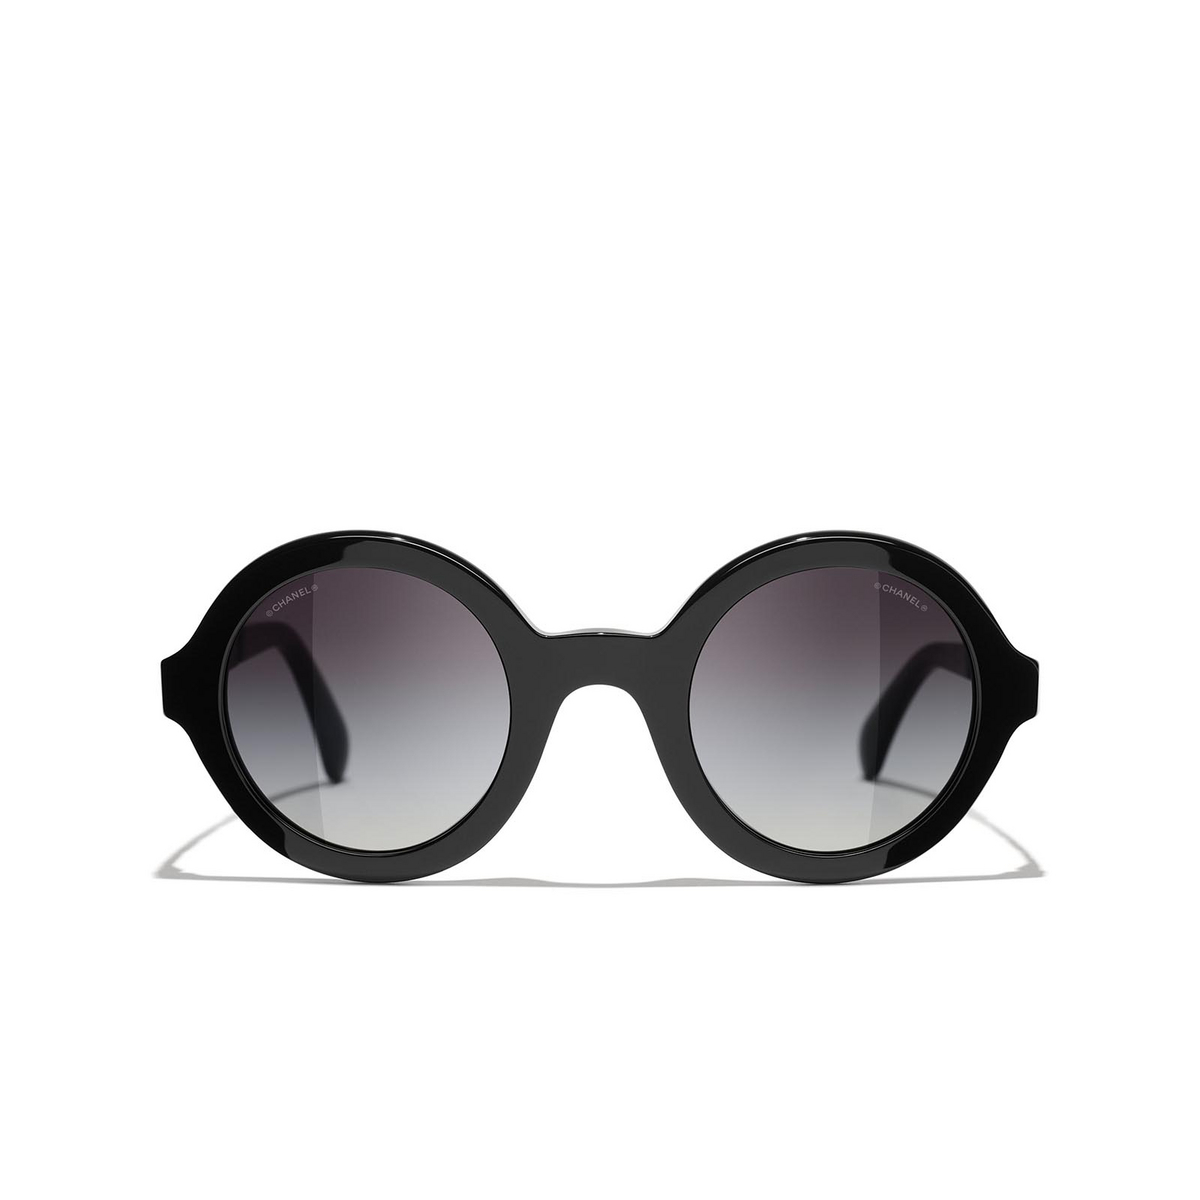 CHANEL 5414 Butterfly Acetate Sunglasses